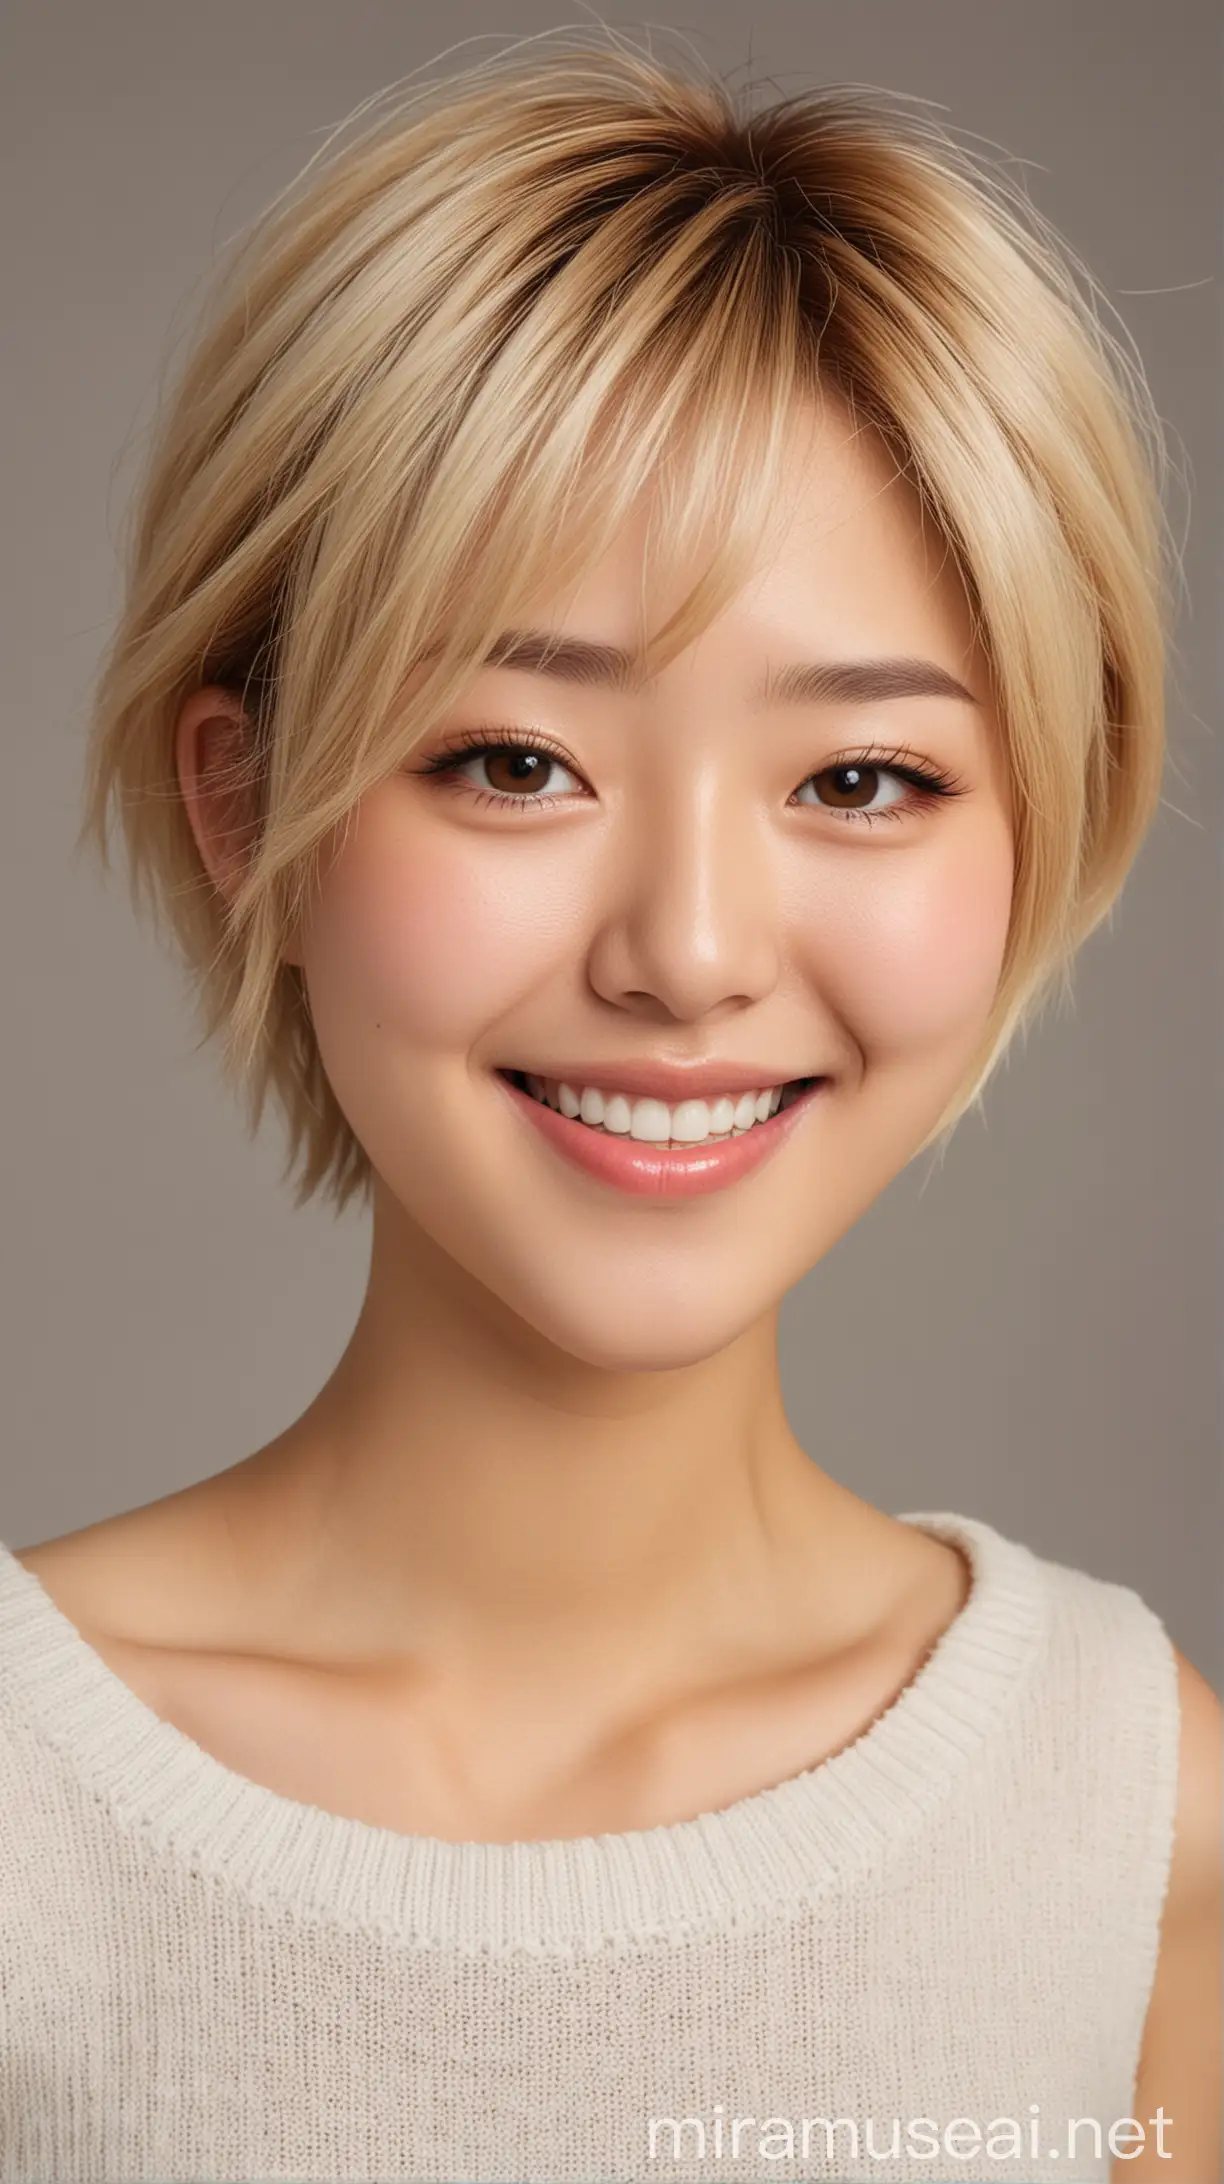 Very attractive Japanese young woman, beautiful and realistic look, blond short hair, plump cheeks, wearing a white sleeveless sweeter, have a big grin on her face 